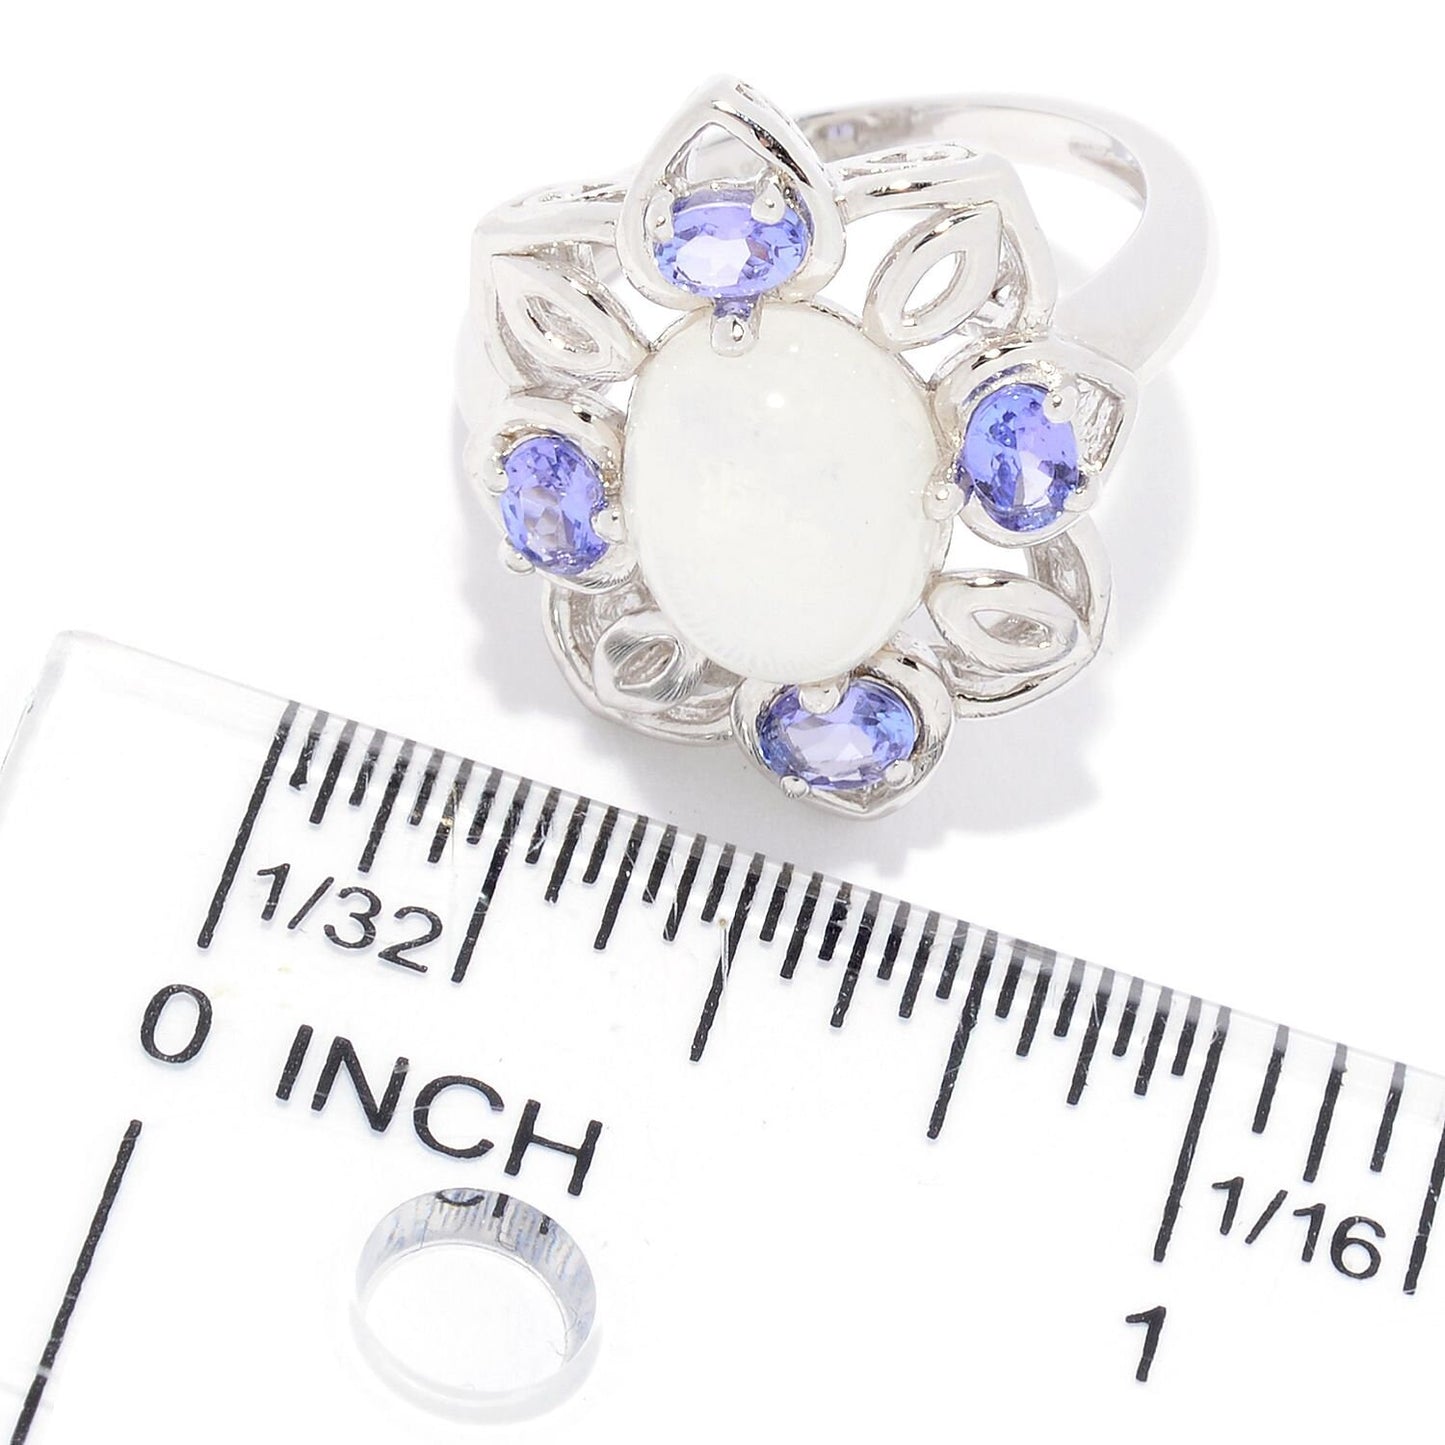 Rainbow Moonstone With Tanzanite Ring, Sterling Silver Ring, Engagement Ring, Birthstone Ring-Gemstone Jewelry Anniversary Gift-Gift For Her